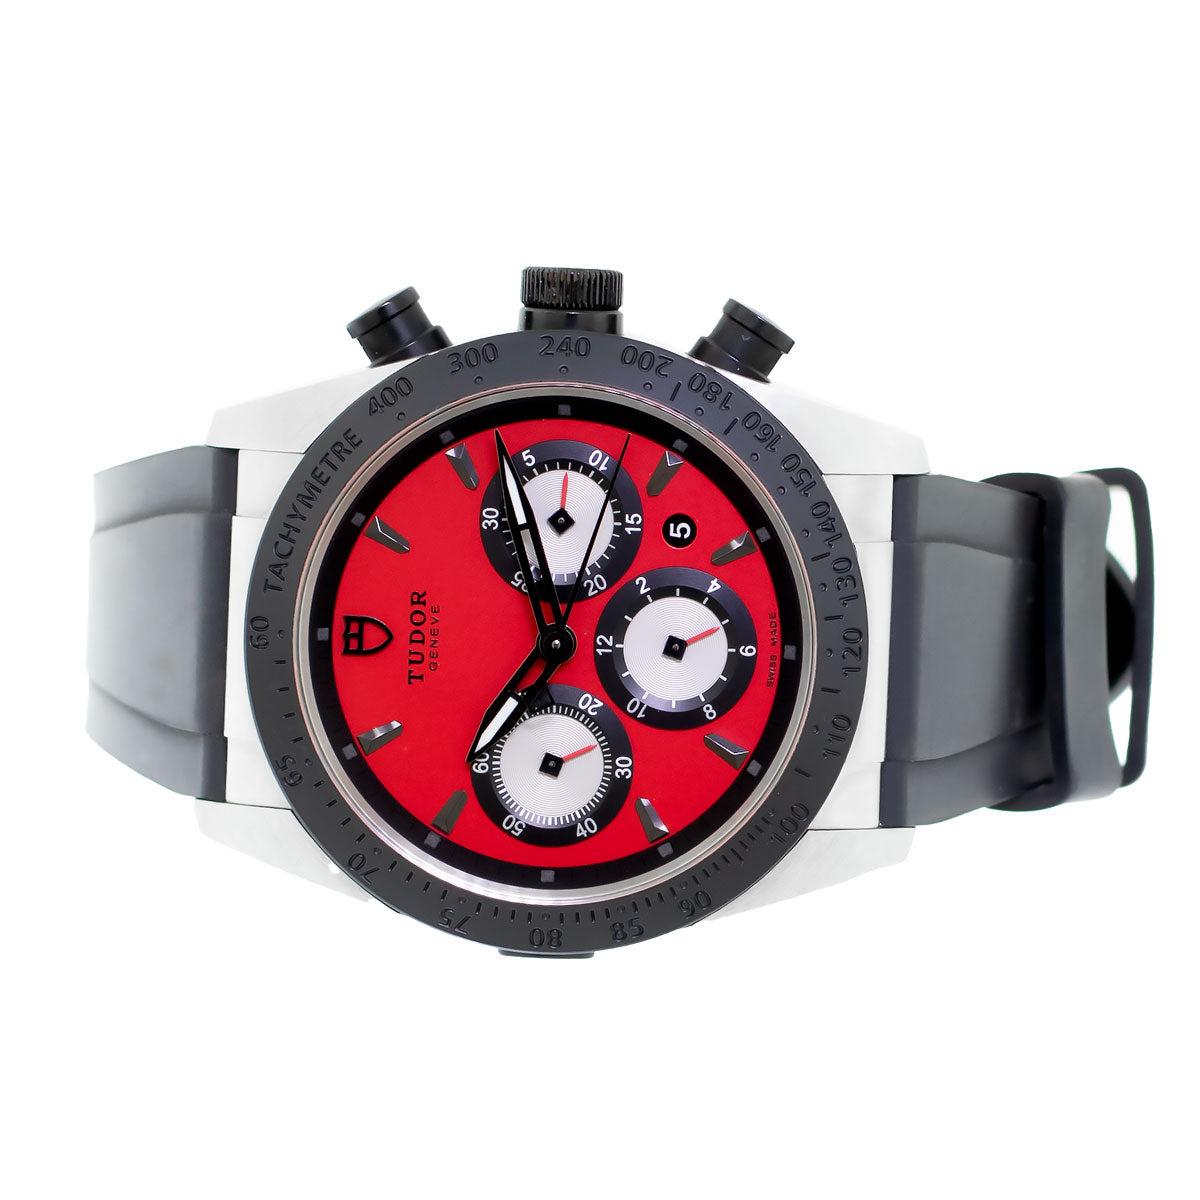 Tudor Fastrider Chronograph 42mm Stainless Steel Red Dial 42010N